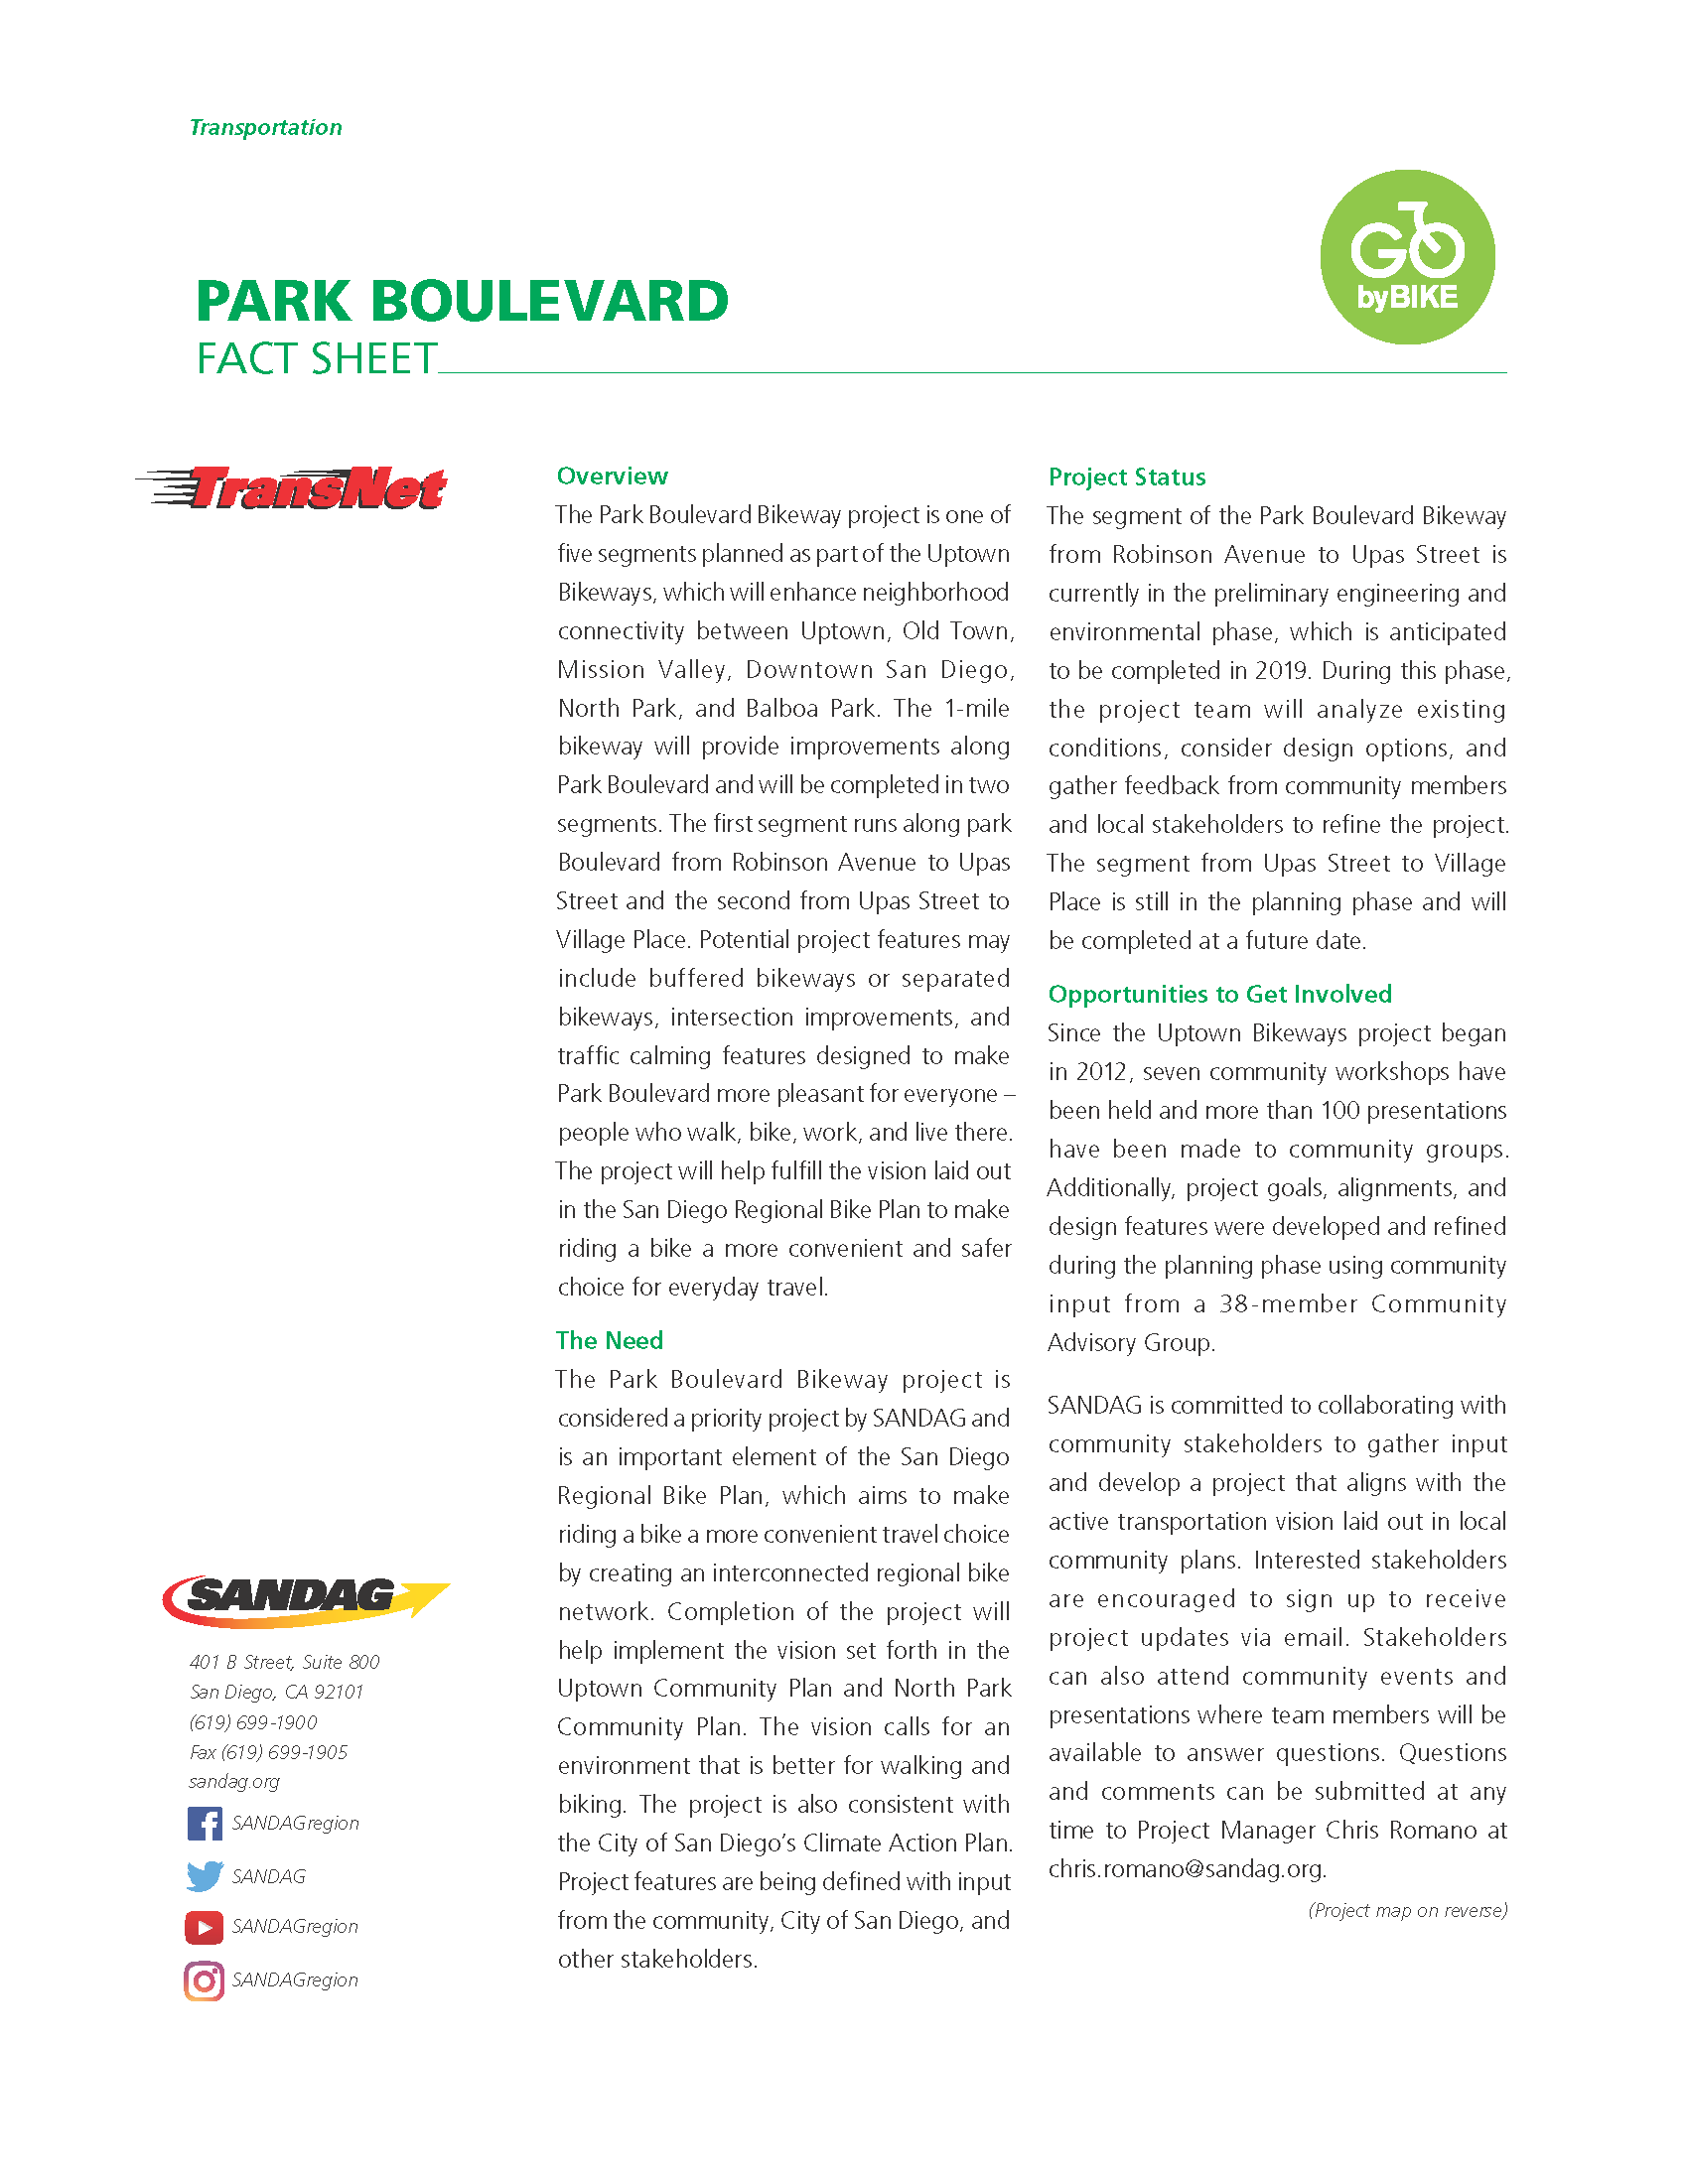 iew the Park Boulevard Bikeway project fact sheet in English.